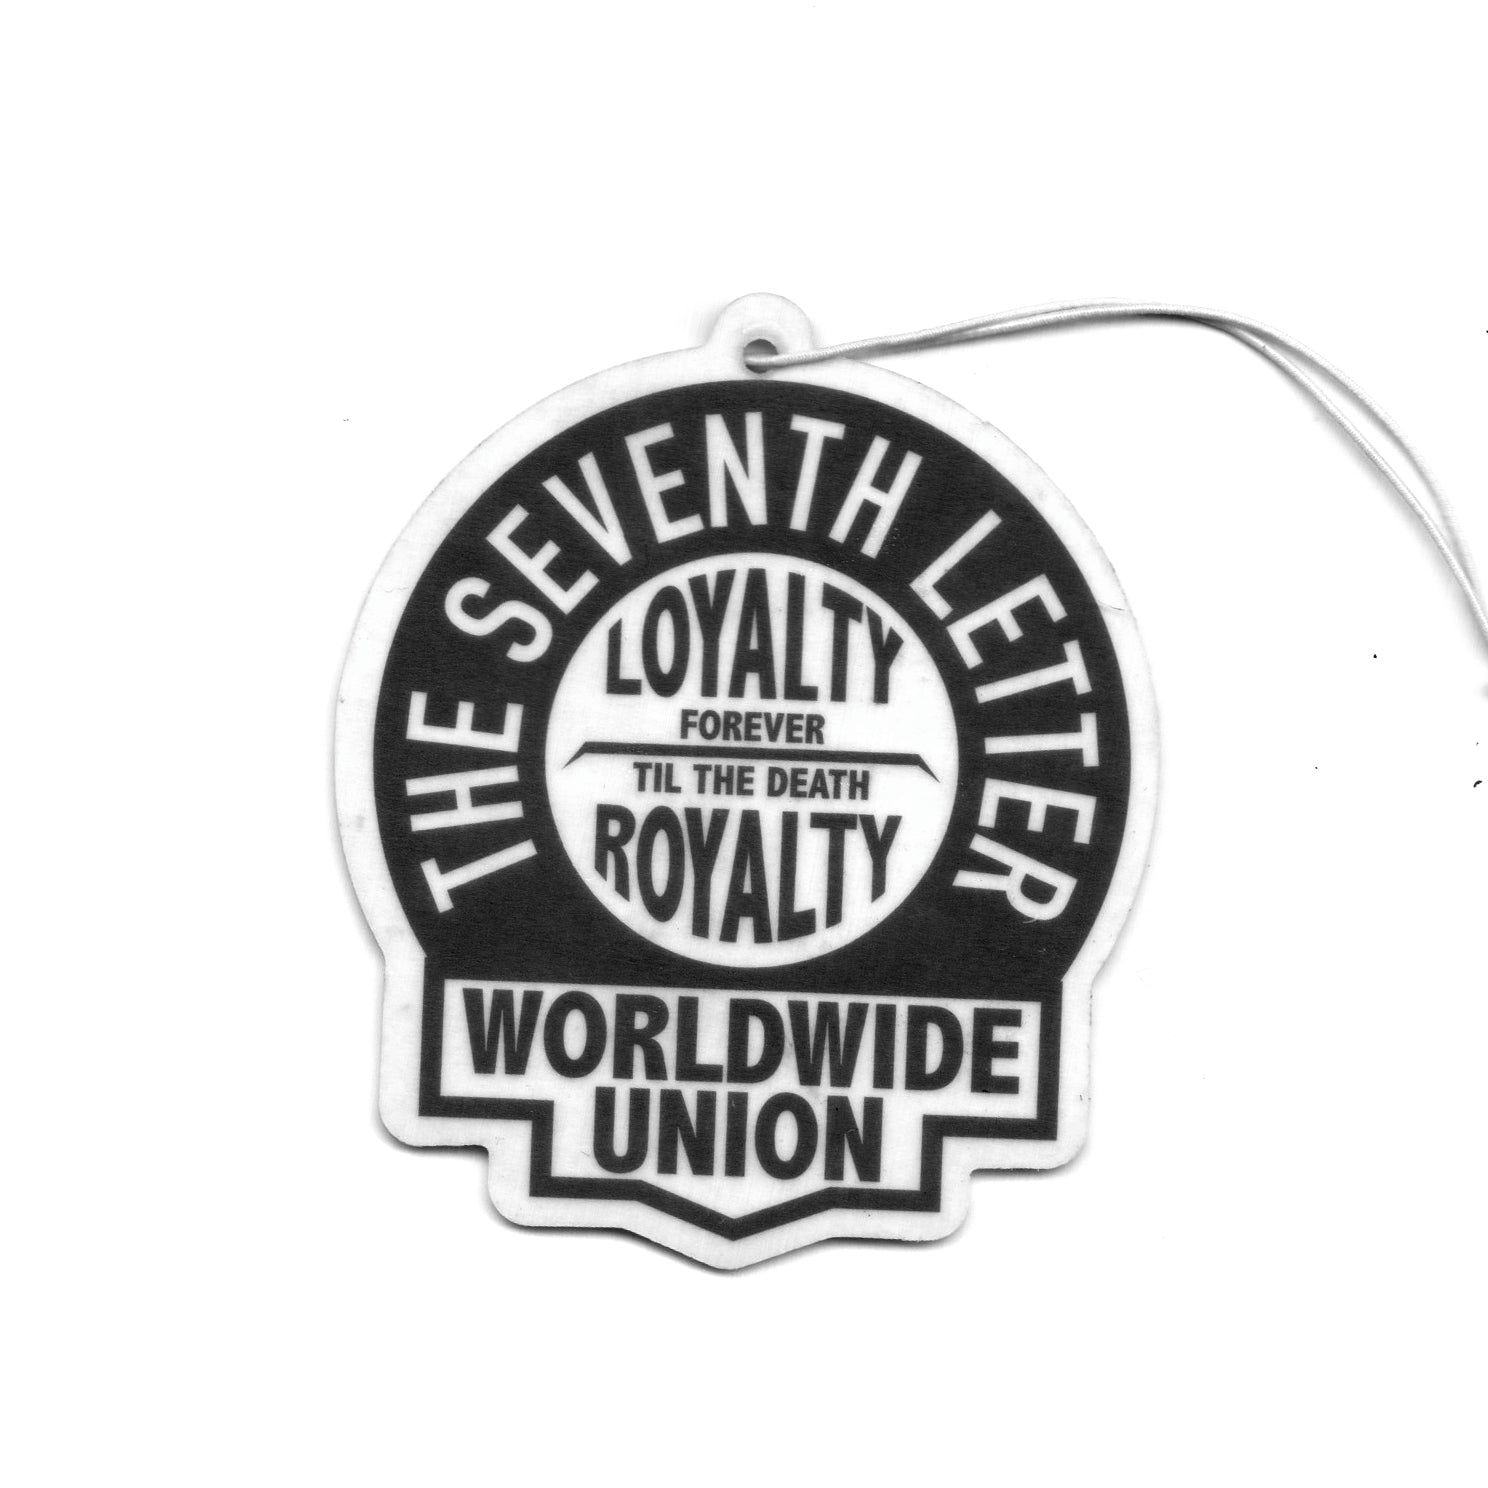 THE SEVENTH LETTER - WORLDWIDE UNION